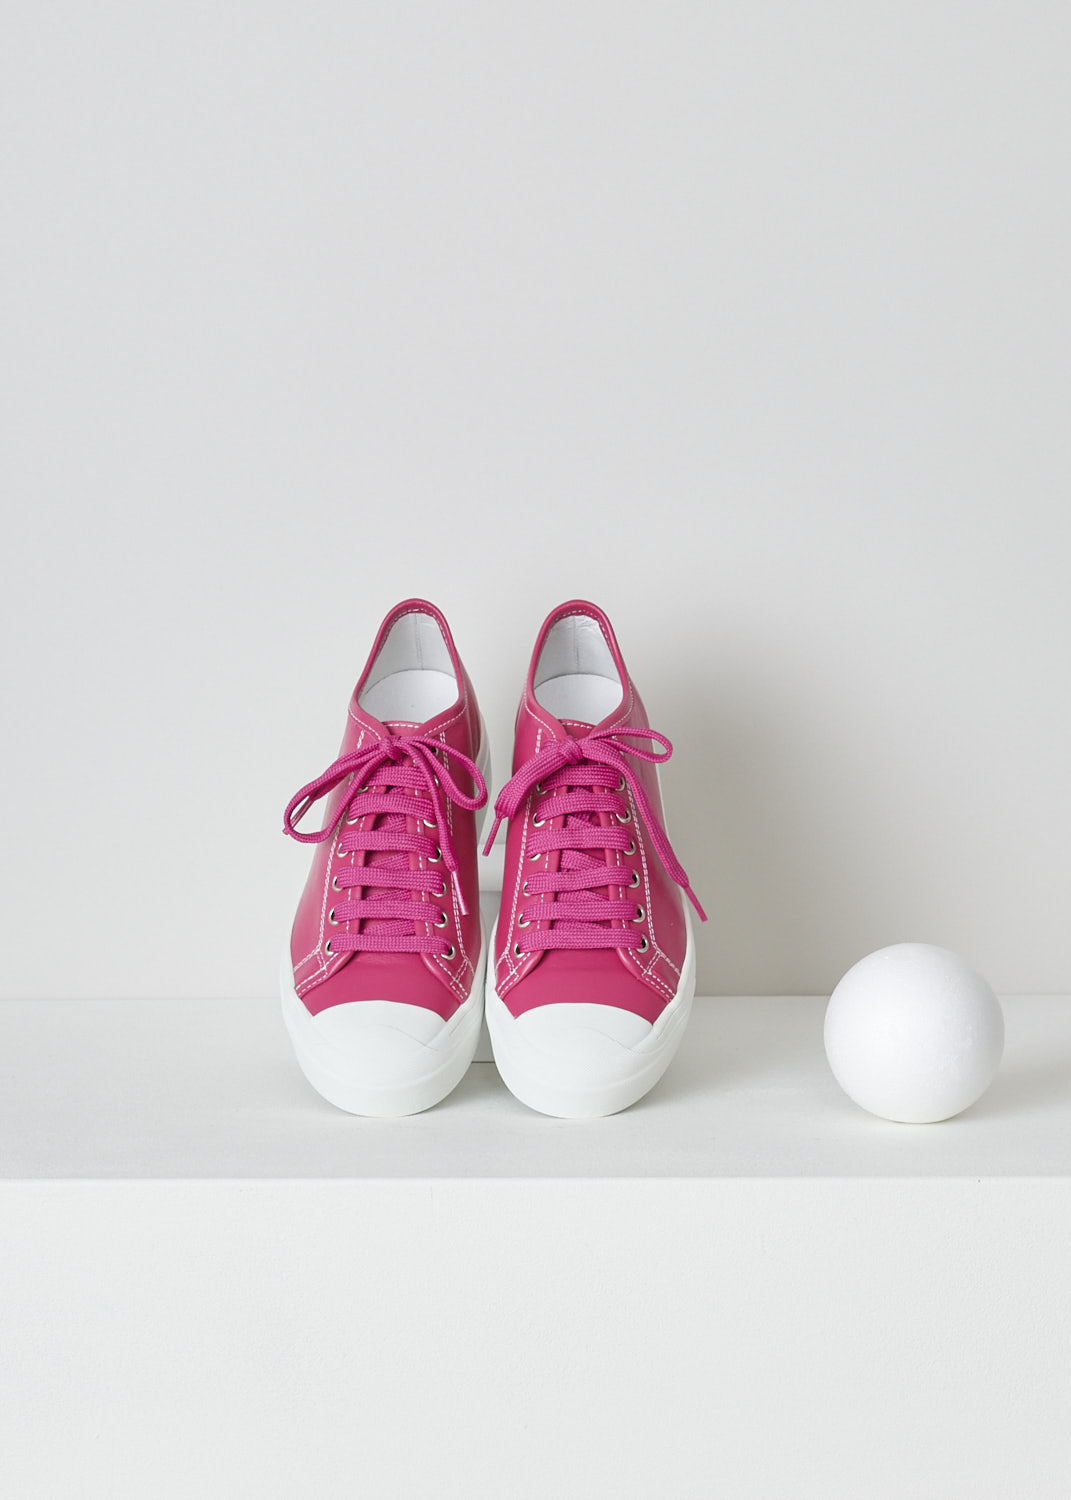 SOFIE Dâ€™HOORE, FUCHSIA PINK LEATHER SHOES, FOLK_LSNOW_FUCHSIA, Pink, Top, These fuchsia pink leather sneakers feature a front lace-up closure with pink laces. These sneakers have a round toe with a white rubber toe cap that goes down into the white rubber sole. Contrasting white stitching is used throughout. The sneakers come with an additional pair of laces in white.
